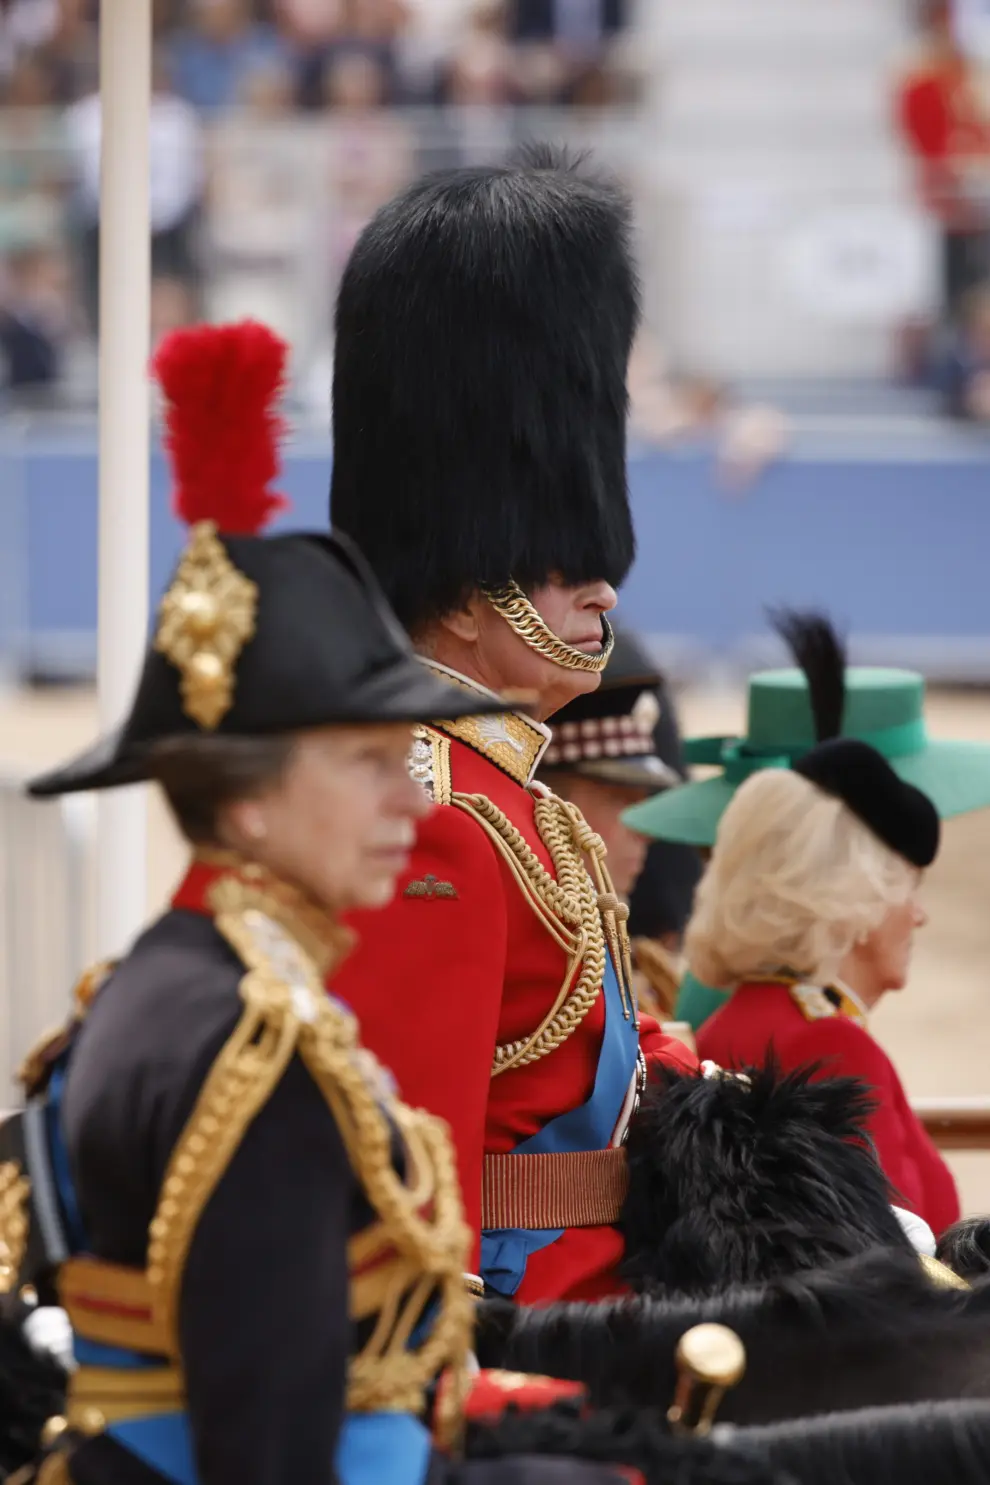 London (United Kingdom), 17/06/2023.- Members of the royal family watch the regiments of the Household Division at Trooping the Colour on Horse Guards Parade, London, Britain, 17 June 2023. The Trooping of the Colour traditionally marks the official birthday of the British sovereign and features a parade of over 1,400 soldiers, 200 horses and 400 musicians. This is King Charles III first Trooping as sovereign, joining the parade on horseback, marking the first time that the reigning monarch has ridden at this event since 1986. (Reino Unido, Londres) EFE/EPA/DAVID CLIFF
 BRITAIN ROYALS